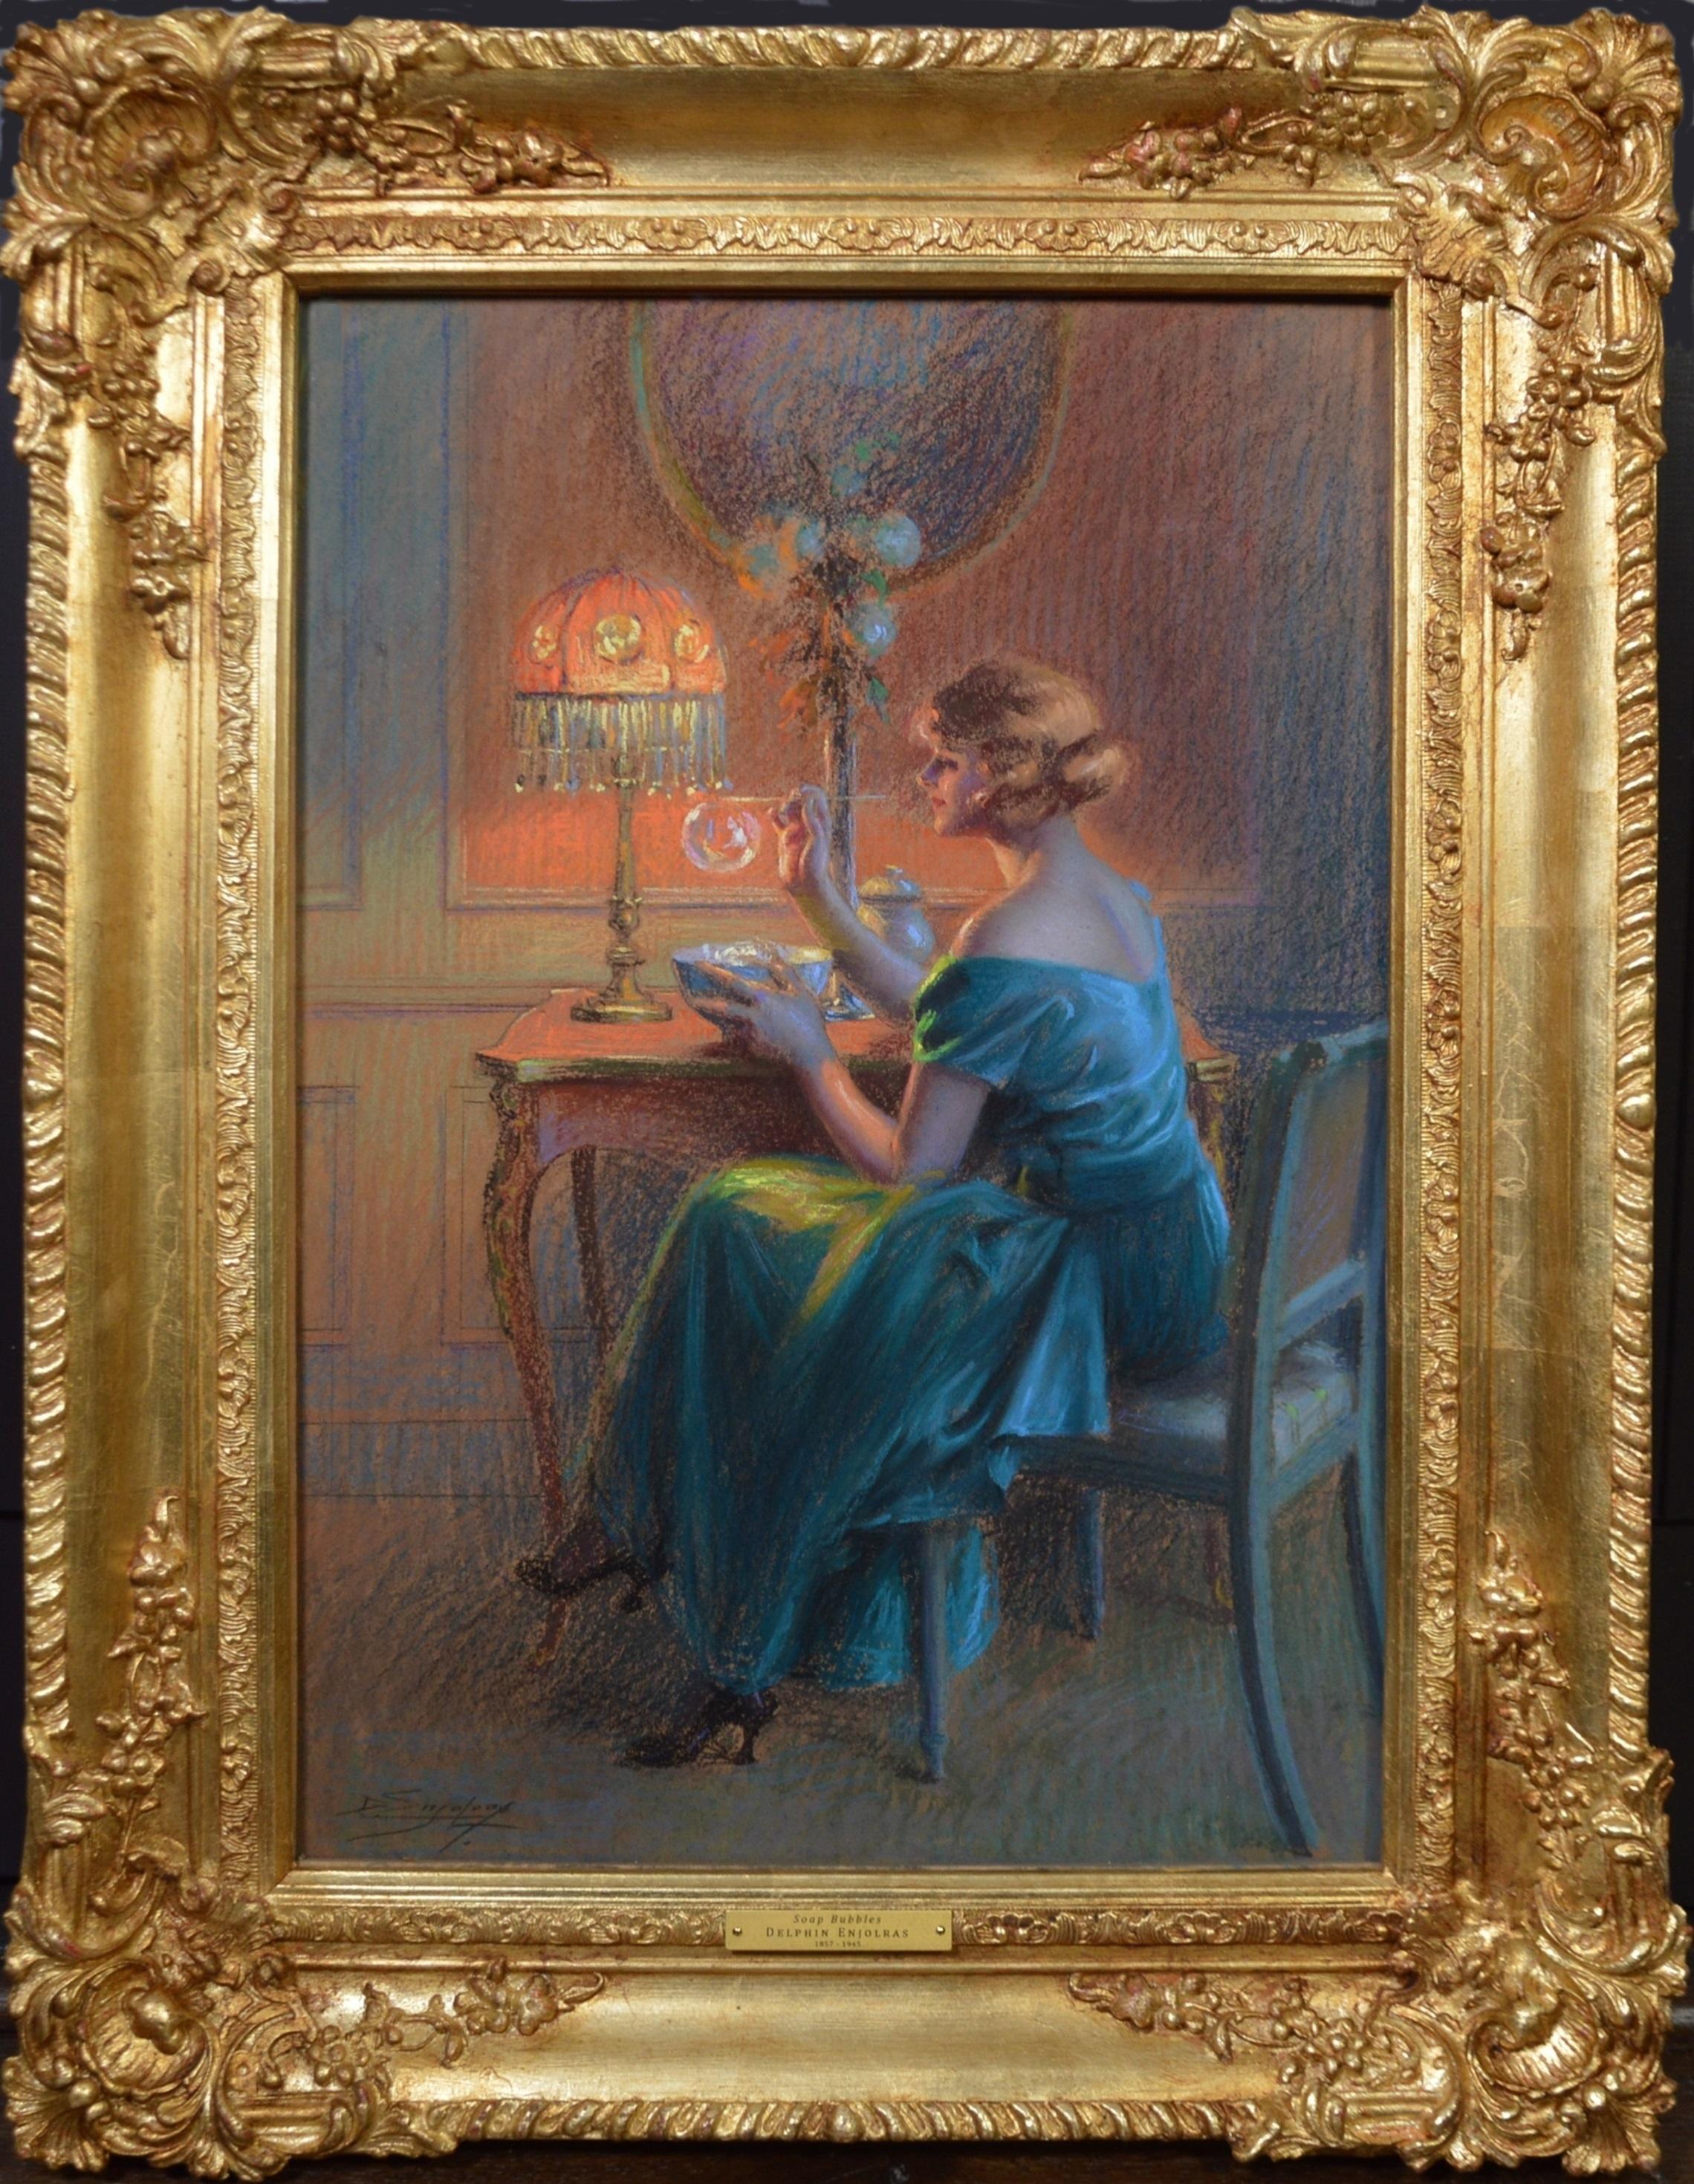 Delphin Enjolras Figurative Painting - Soap Bubbles - Antique Painting of Belle Epoque Beauty by Tiffany Lamplight